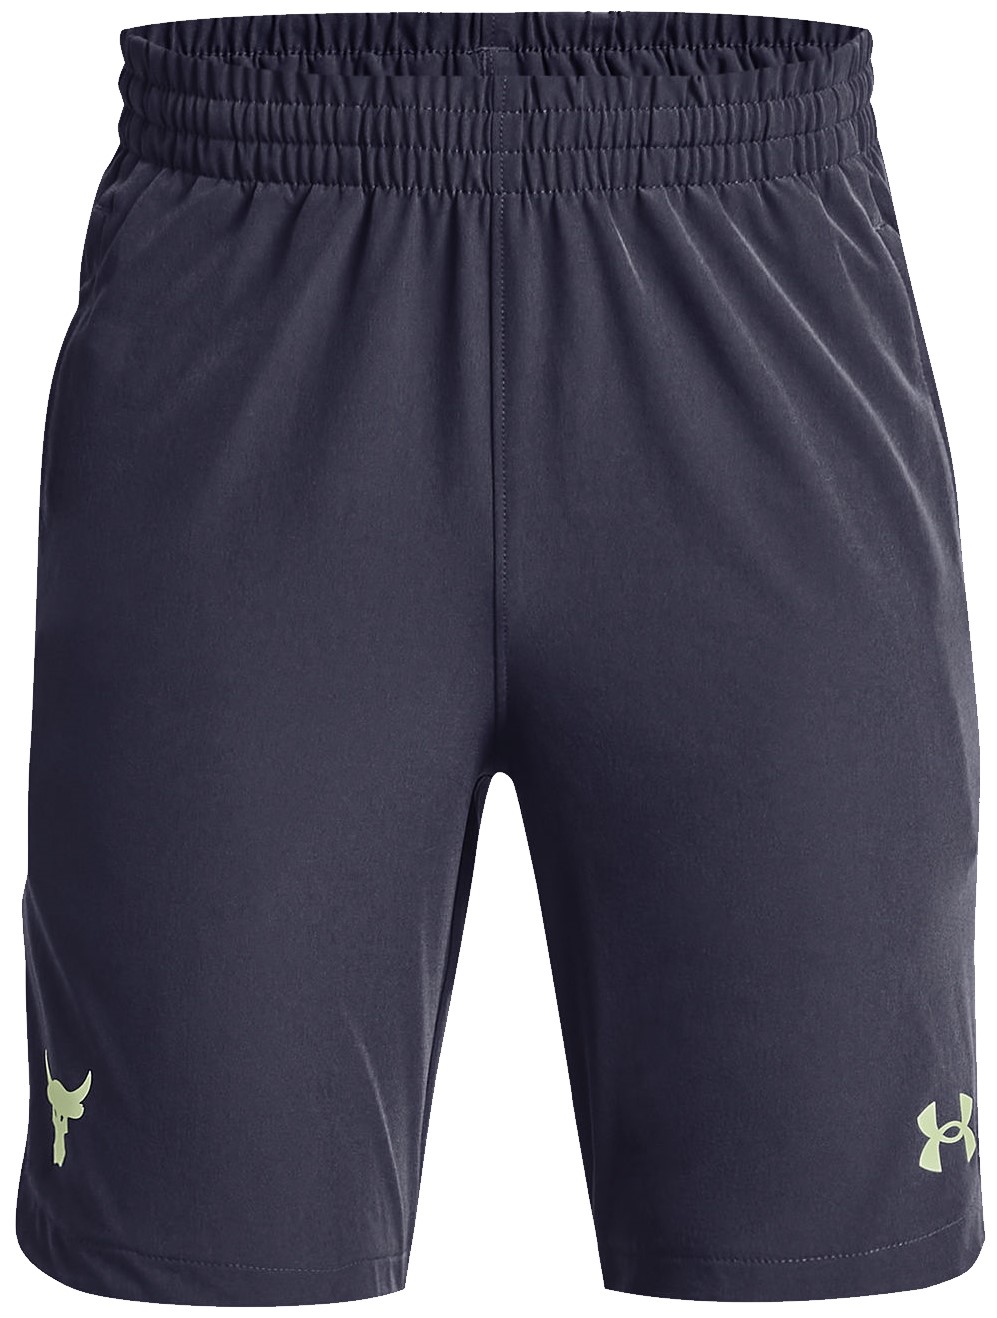 Shorts Under Armour UA Pjt Rock Woven Shorts-GRY